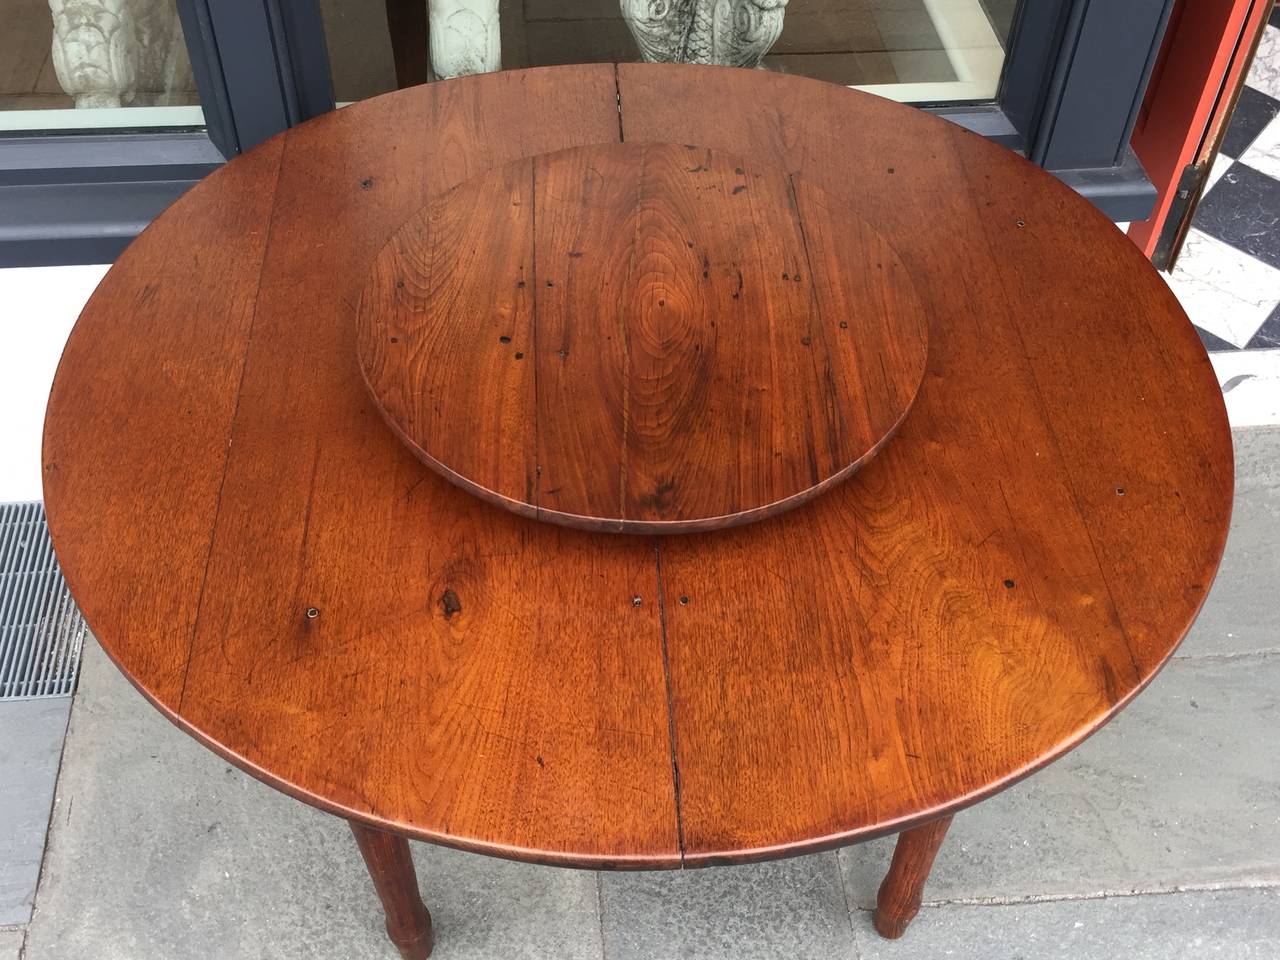 American round dining table with lazy susan mechanism in middle.
Walnut and yellow pine.